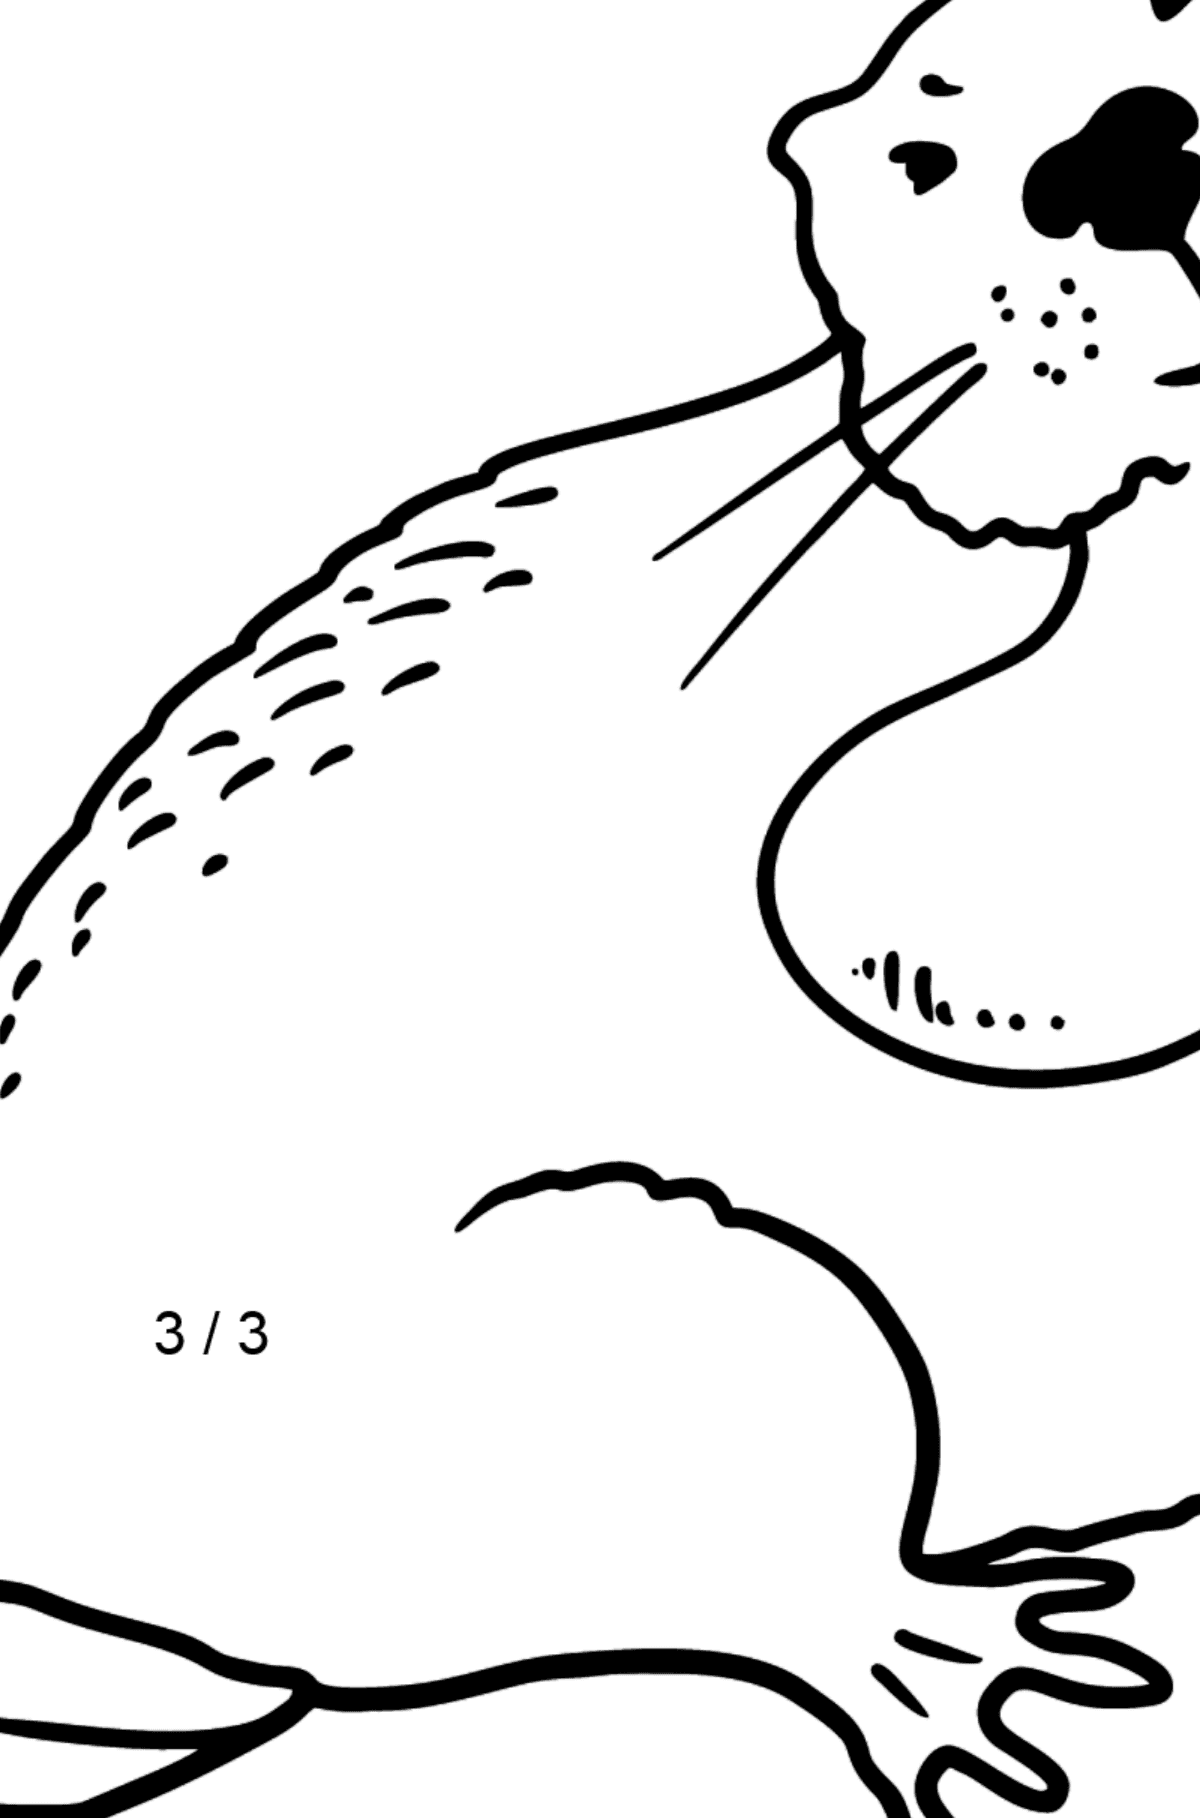 Beaver coloring page - Math Coloring - Division for Kids